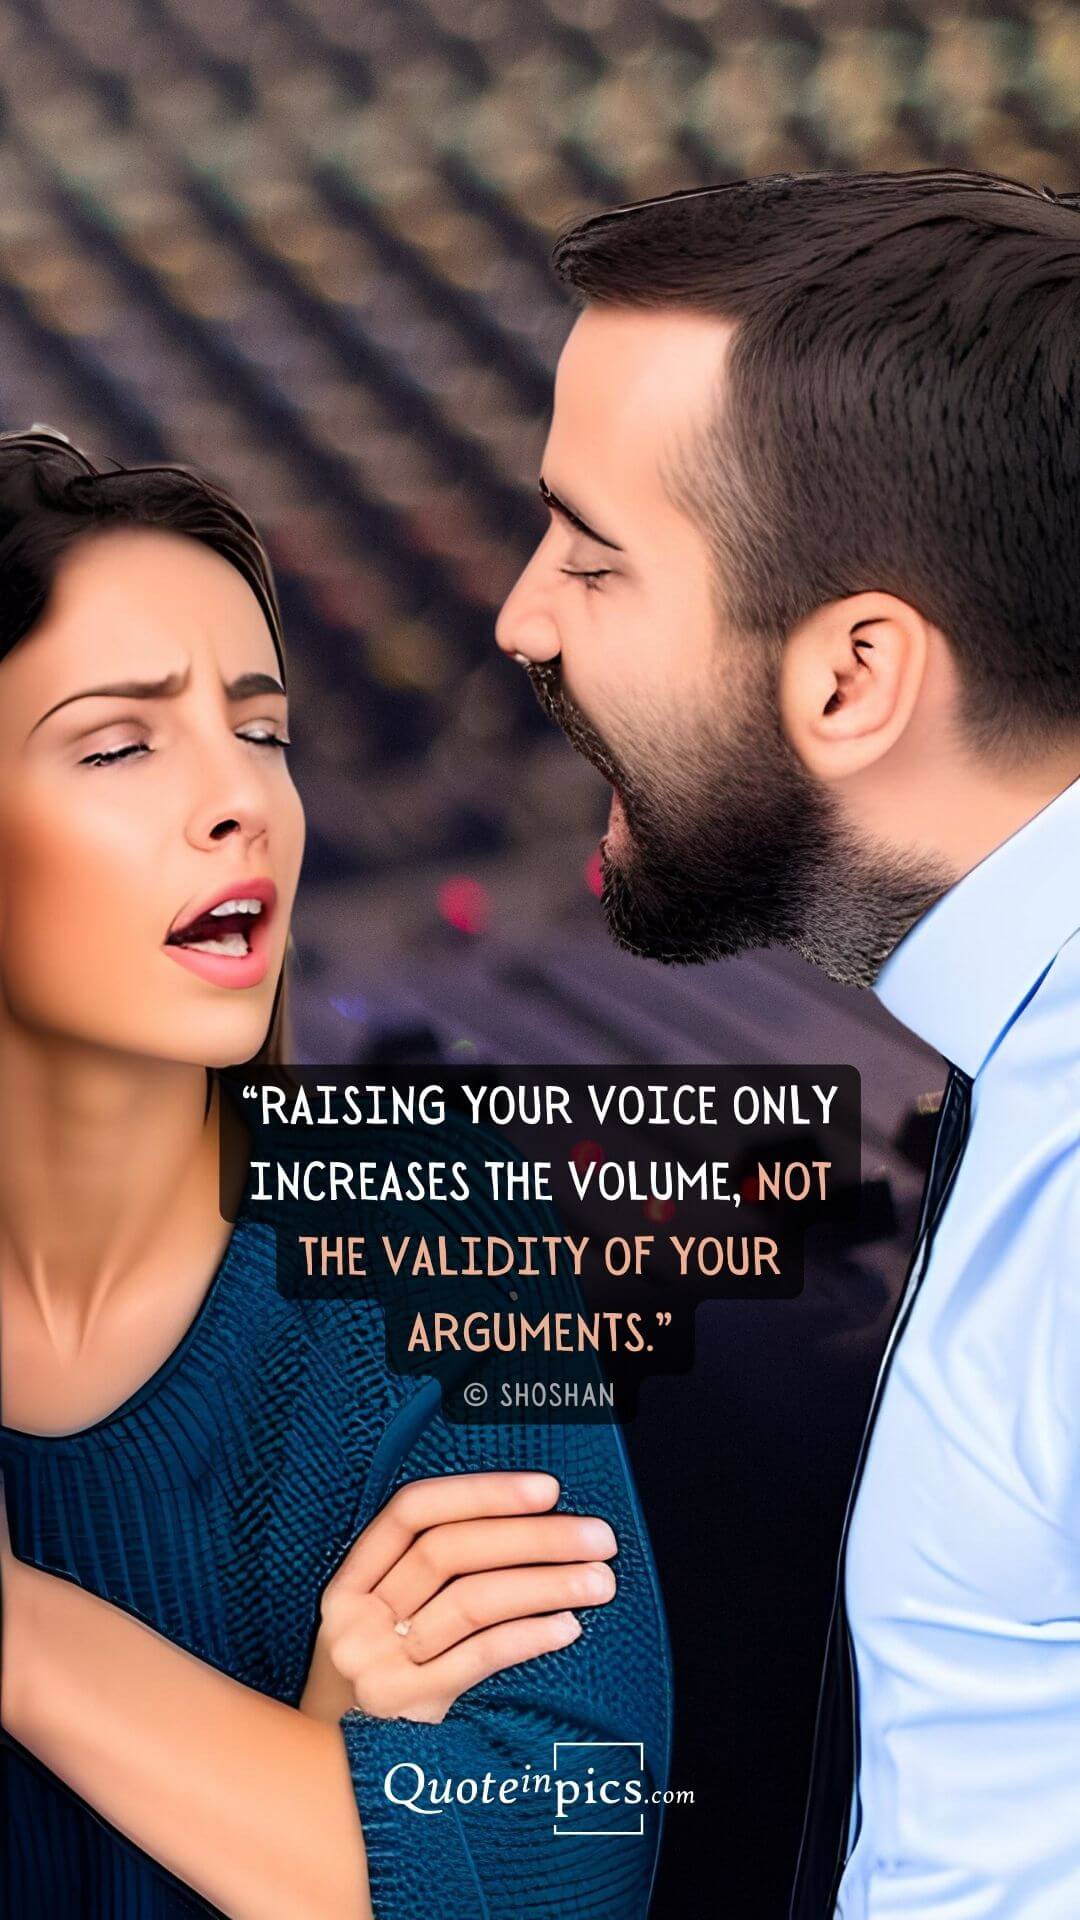 Raising your voice only increases the volume, not the validity of your arguments -Shoshan